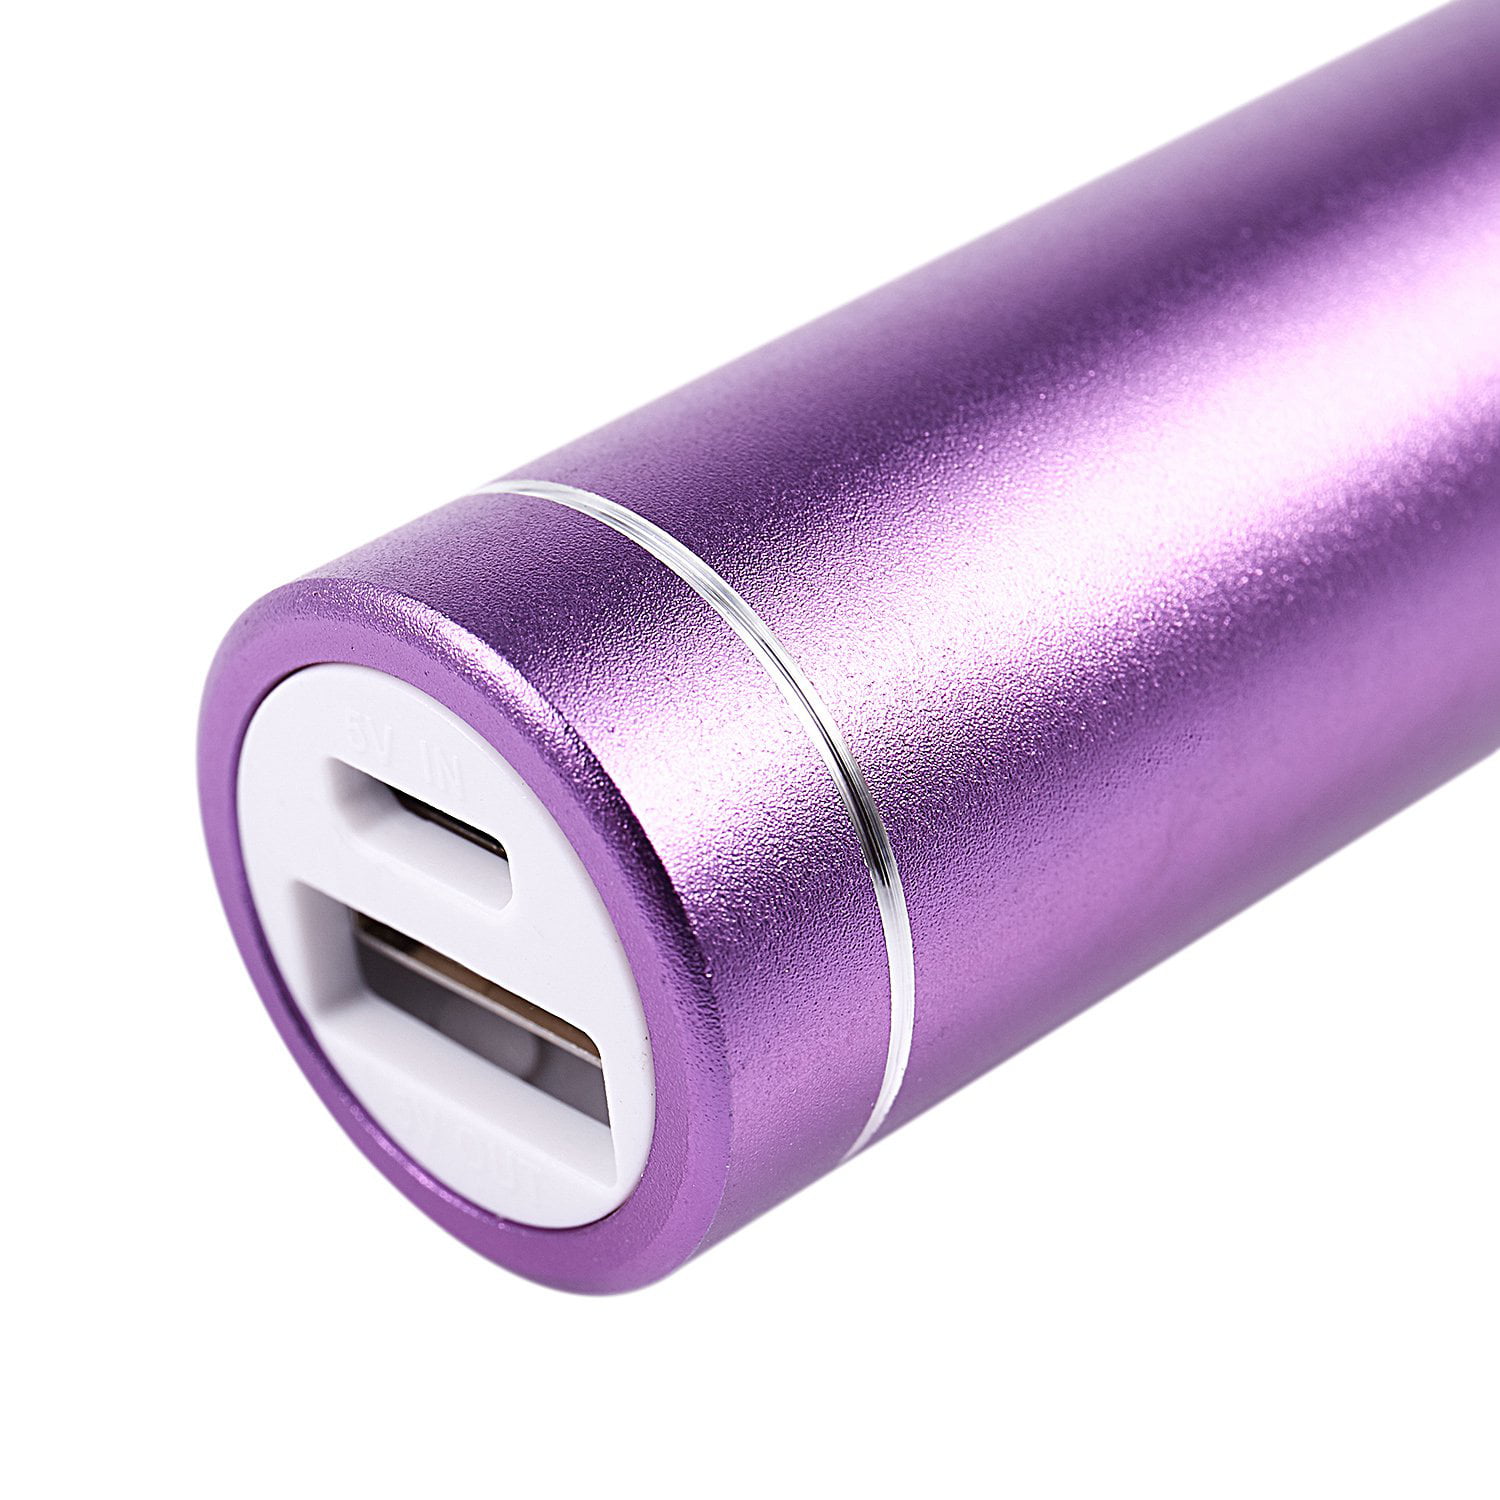 2600mAh Portable External USB Power Bank Box Battery Charger For Mobile Phone Color:Purple R SODIAL